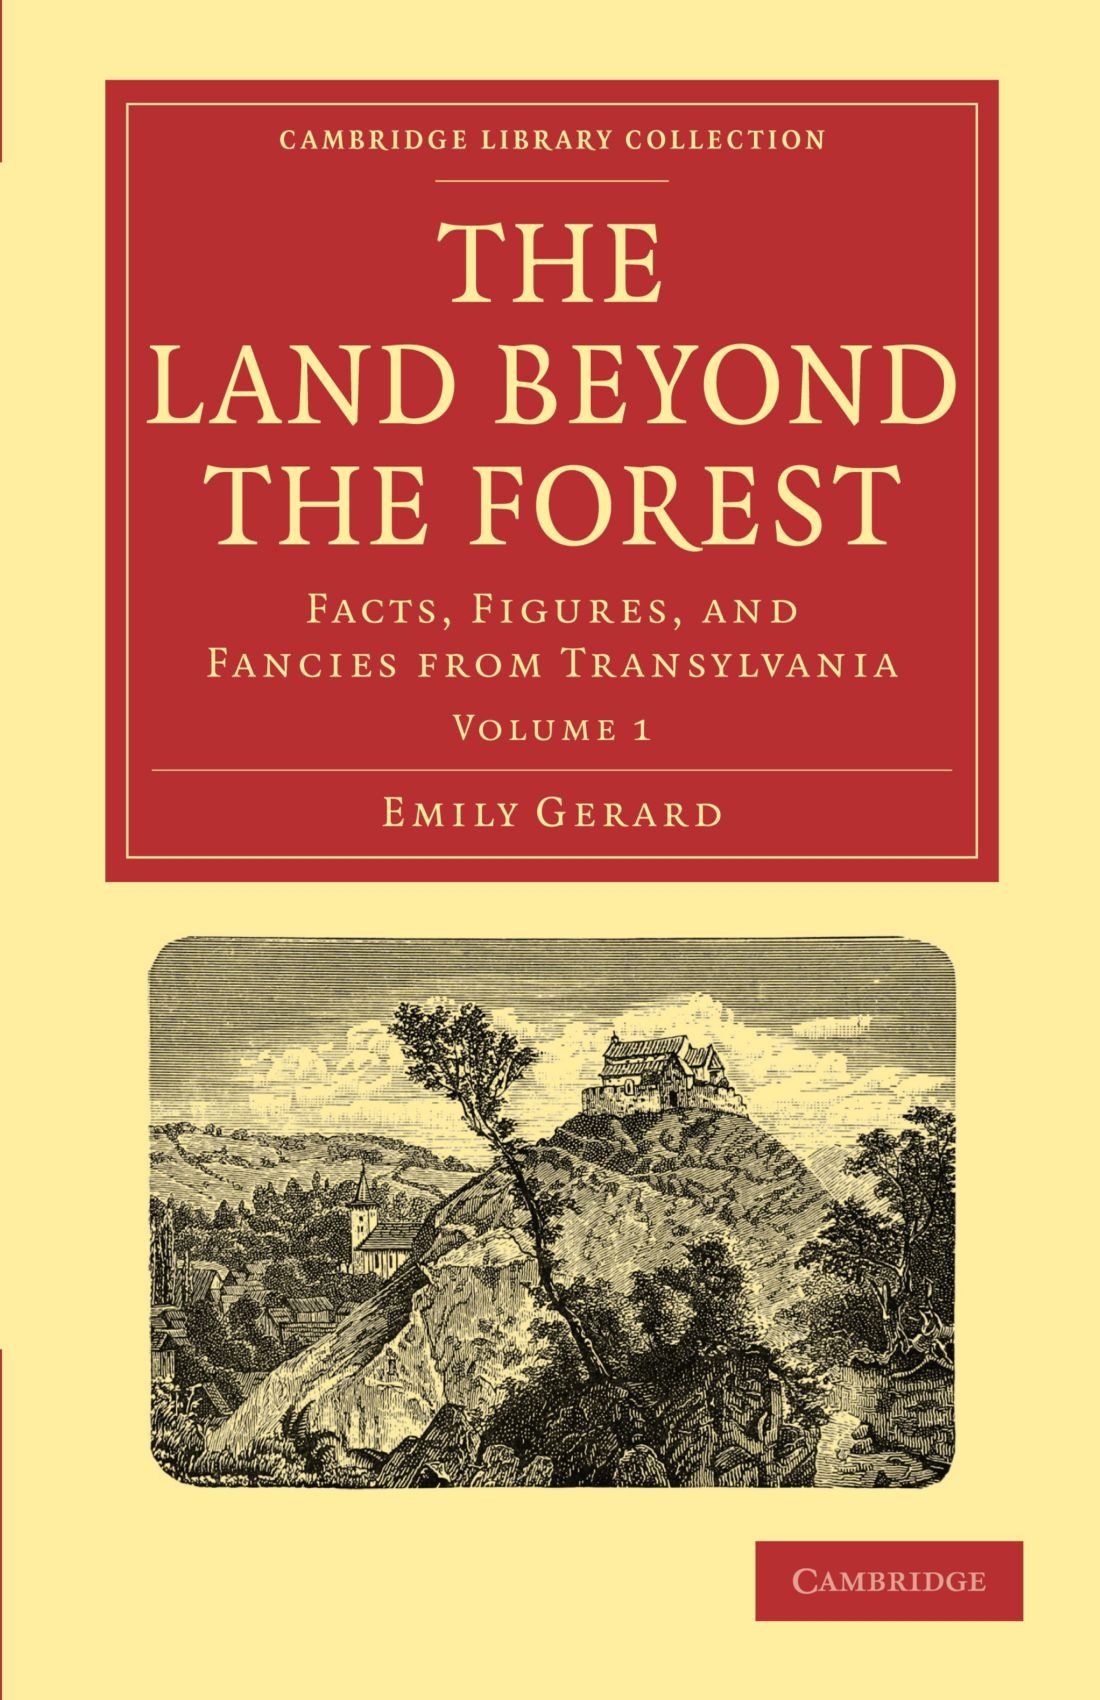 The Land Beyond the Forest: Facts, Figures, and Fancies from Transylvania (Cambridge Library Collection - Travel, Europe) (Volume 1)